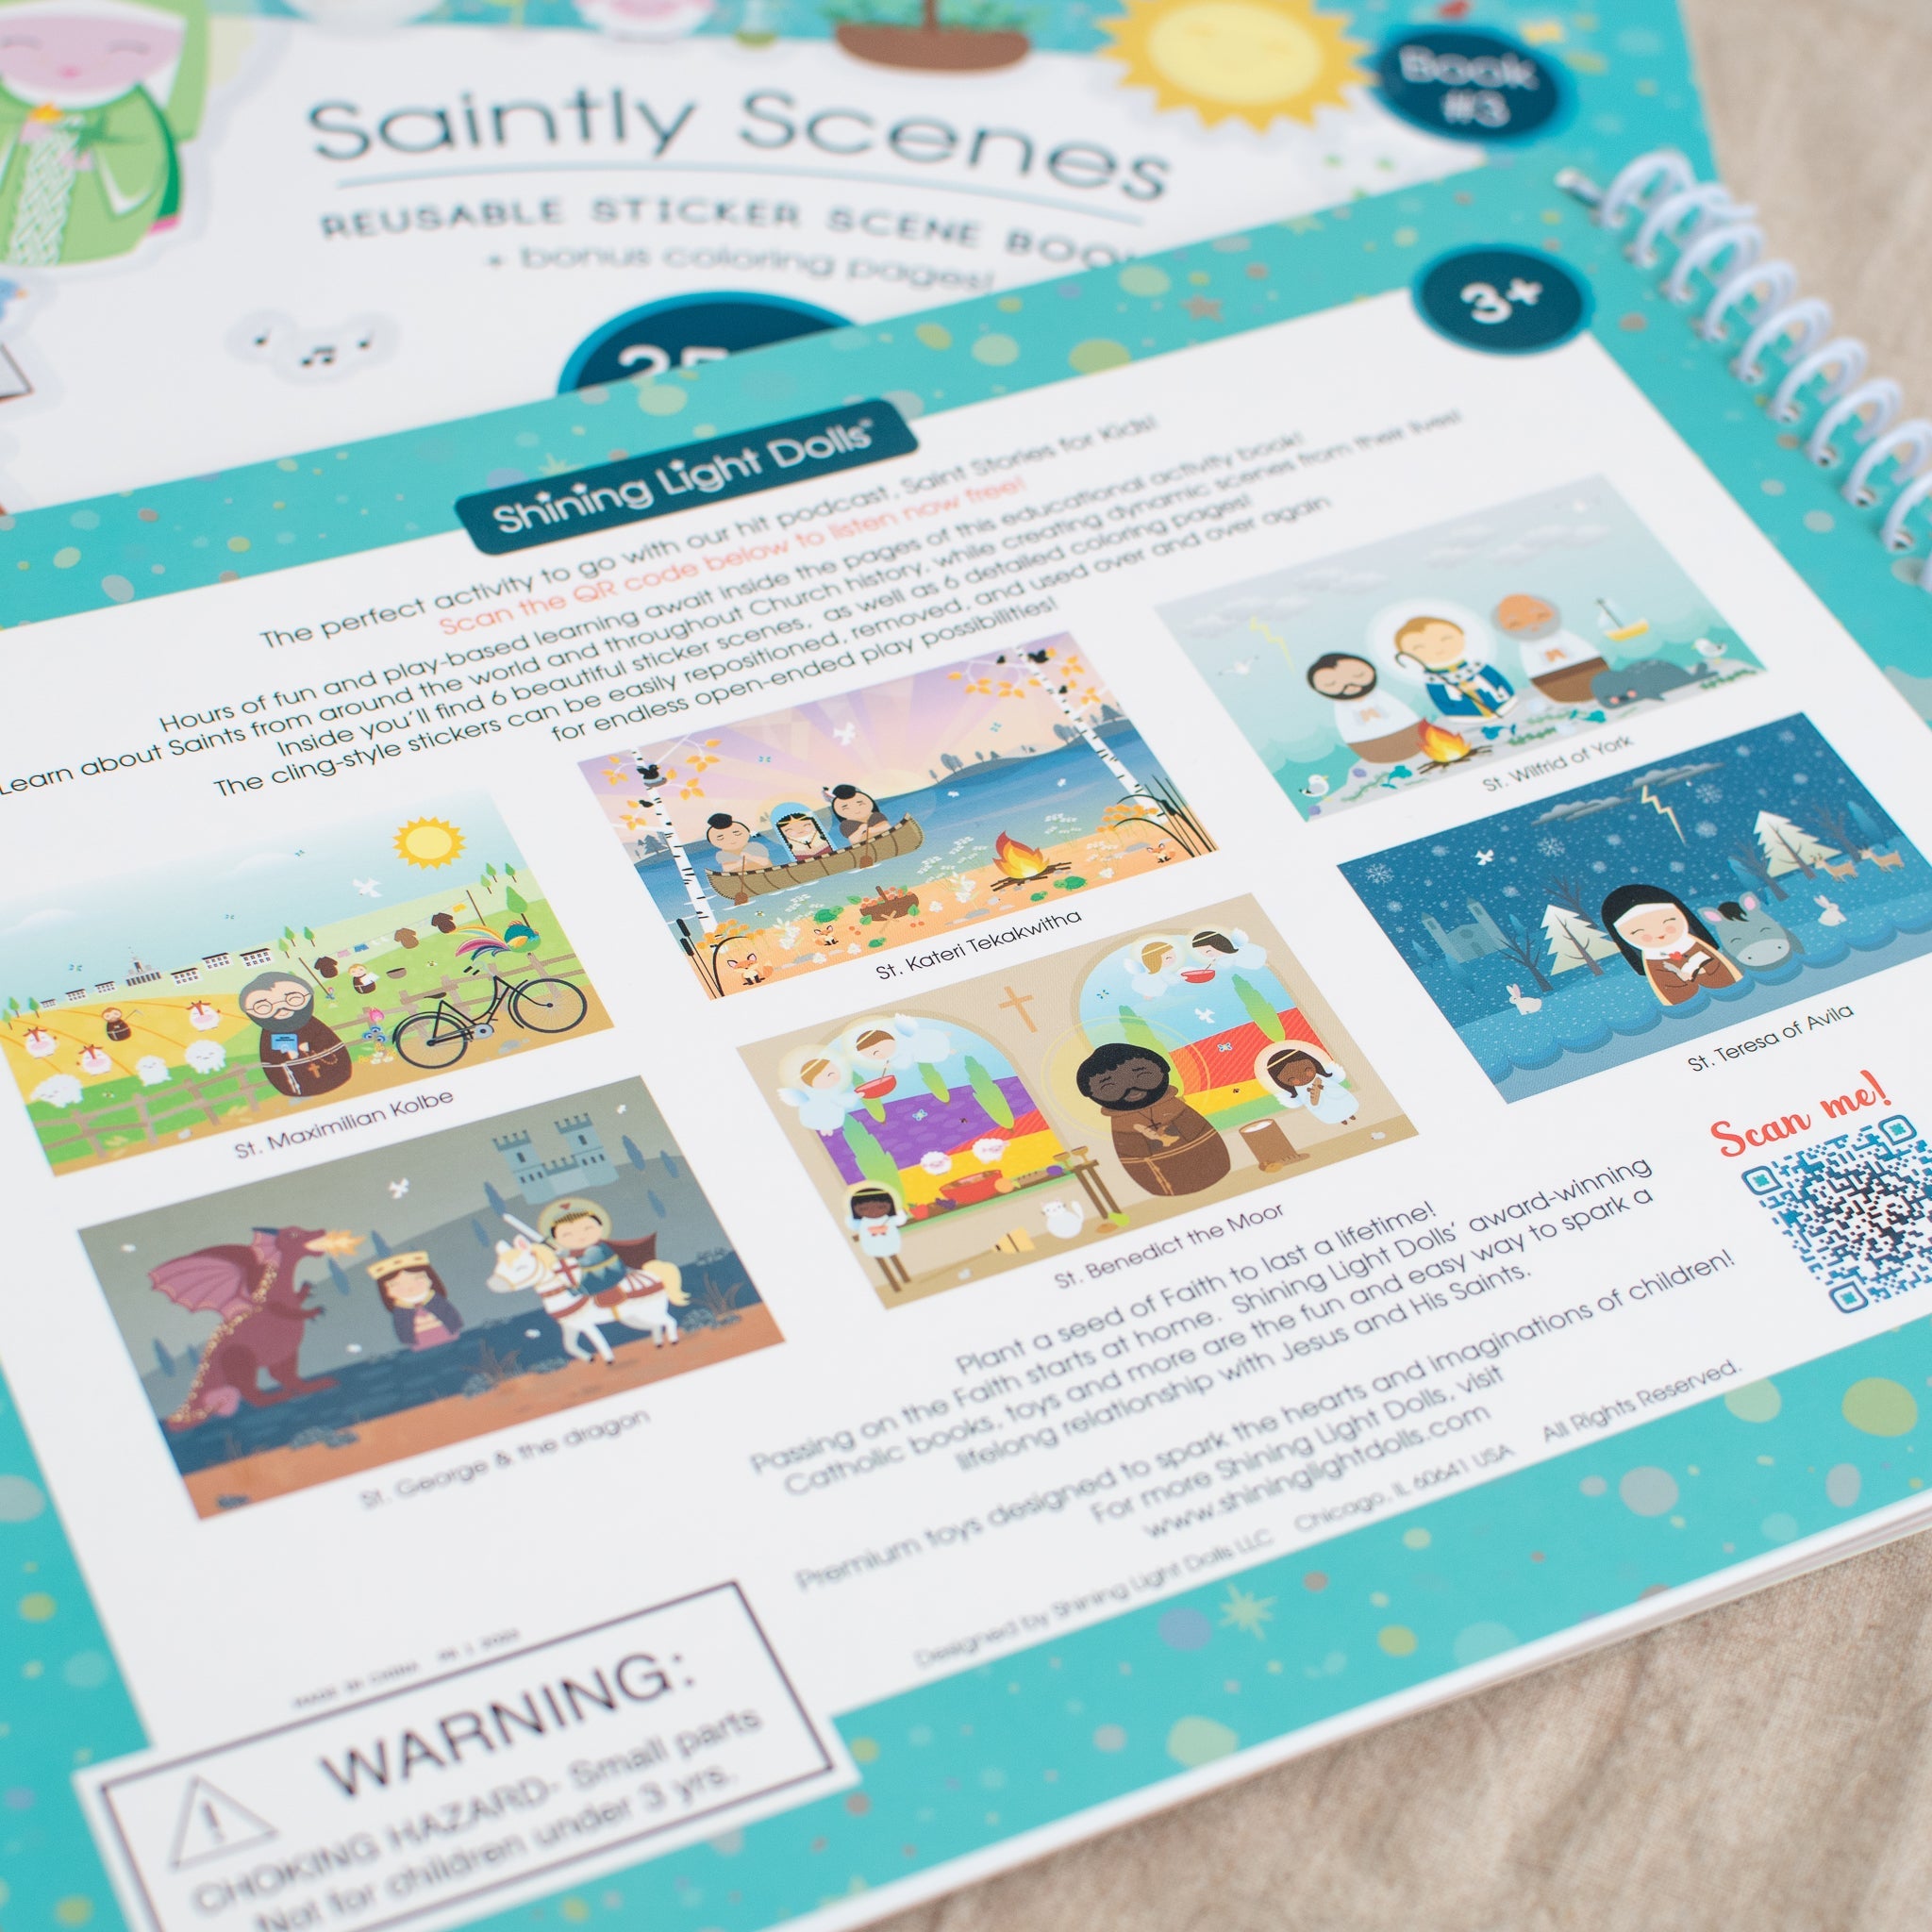 Saintly Scenes Book #2 - Reusable Sticker Scene And Coloring Book